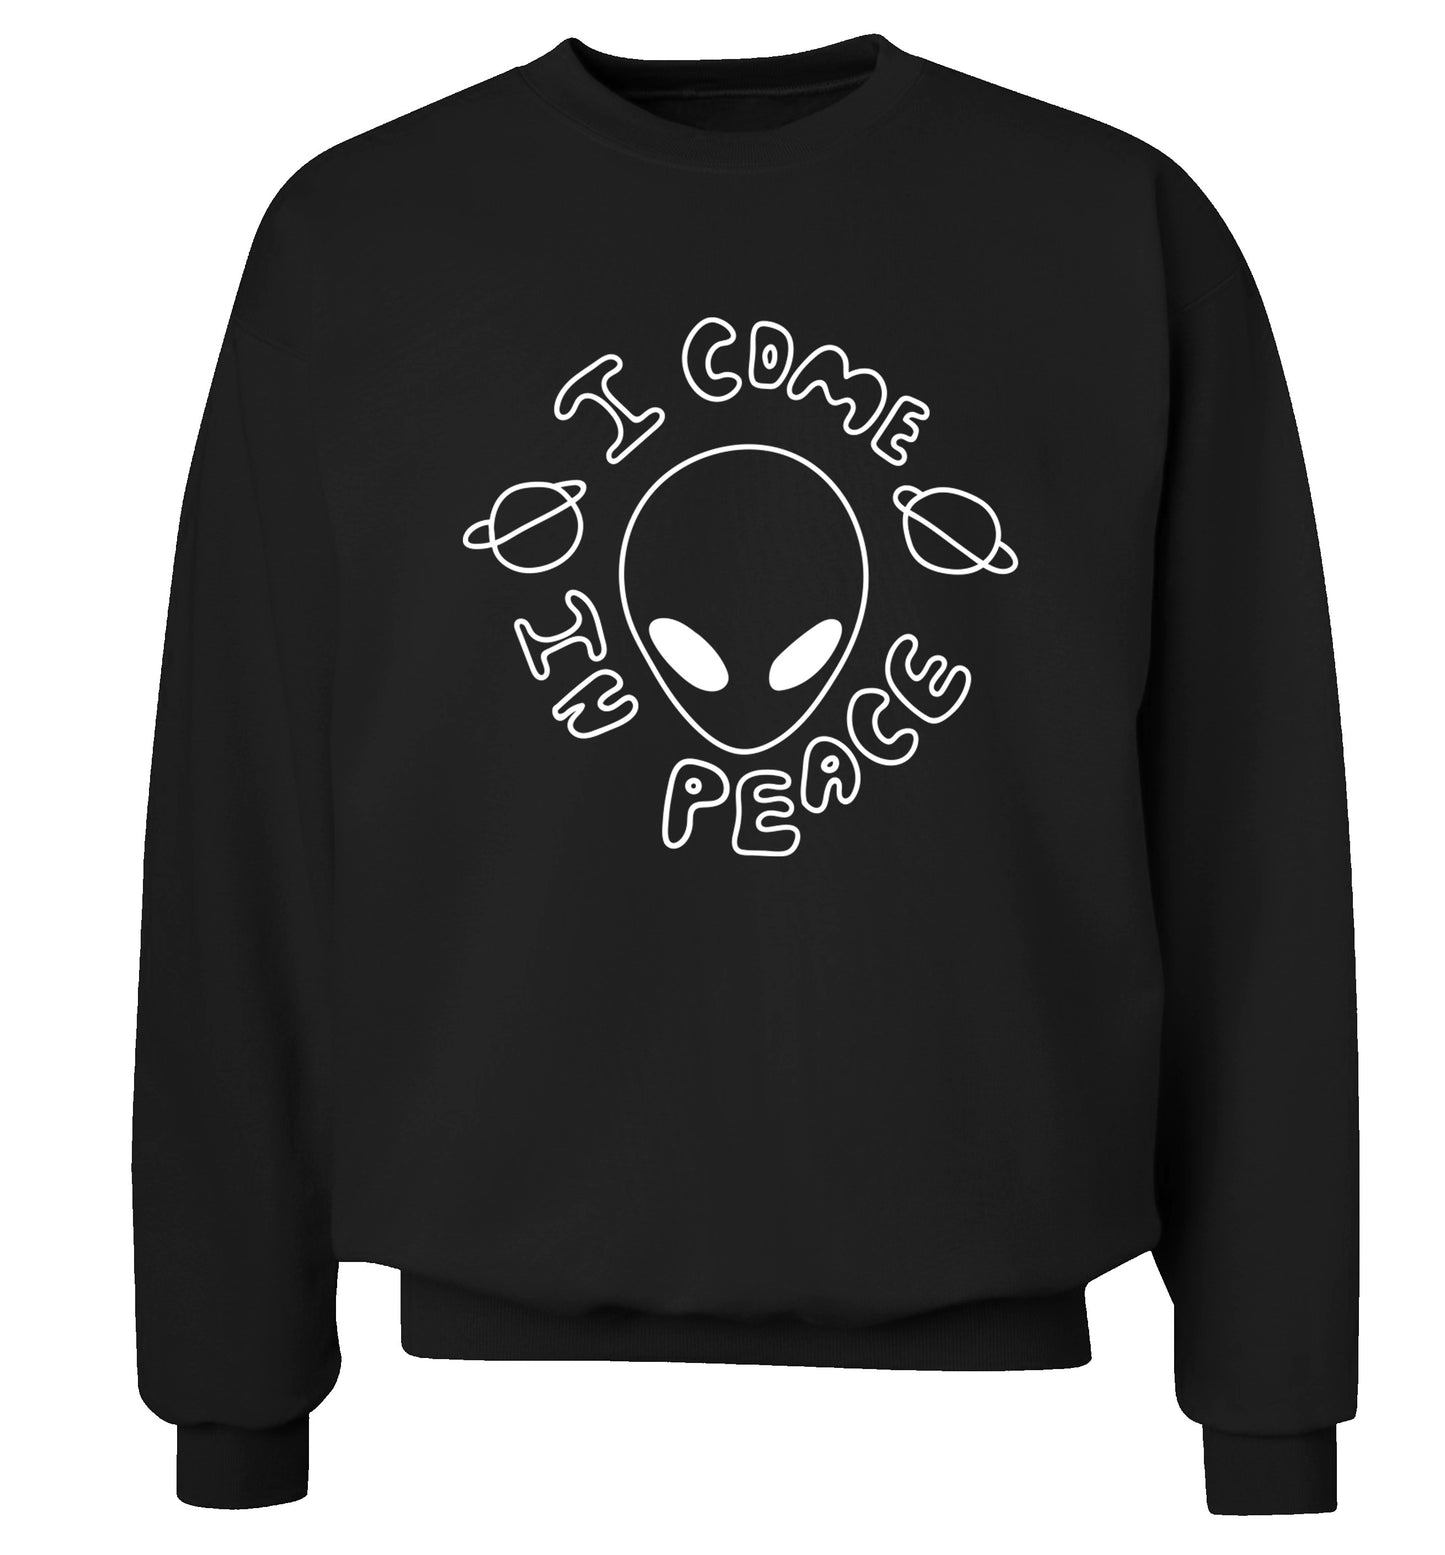 I come in peace Adult's unisex black Sweater 2XL